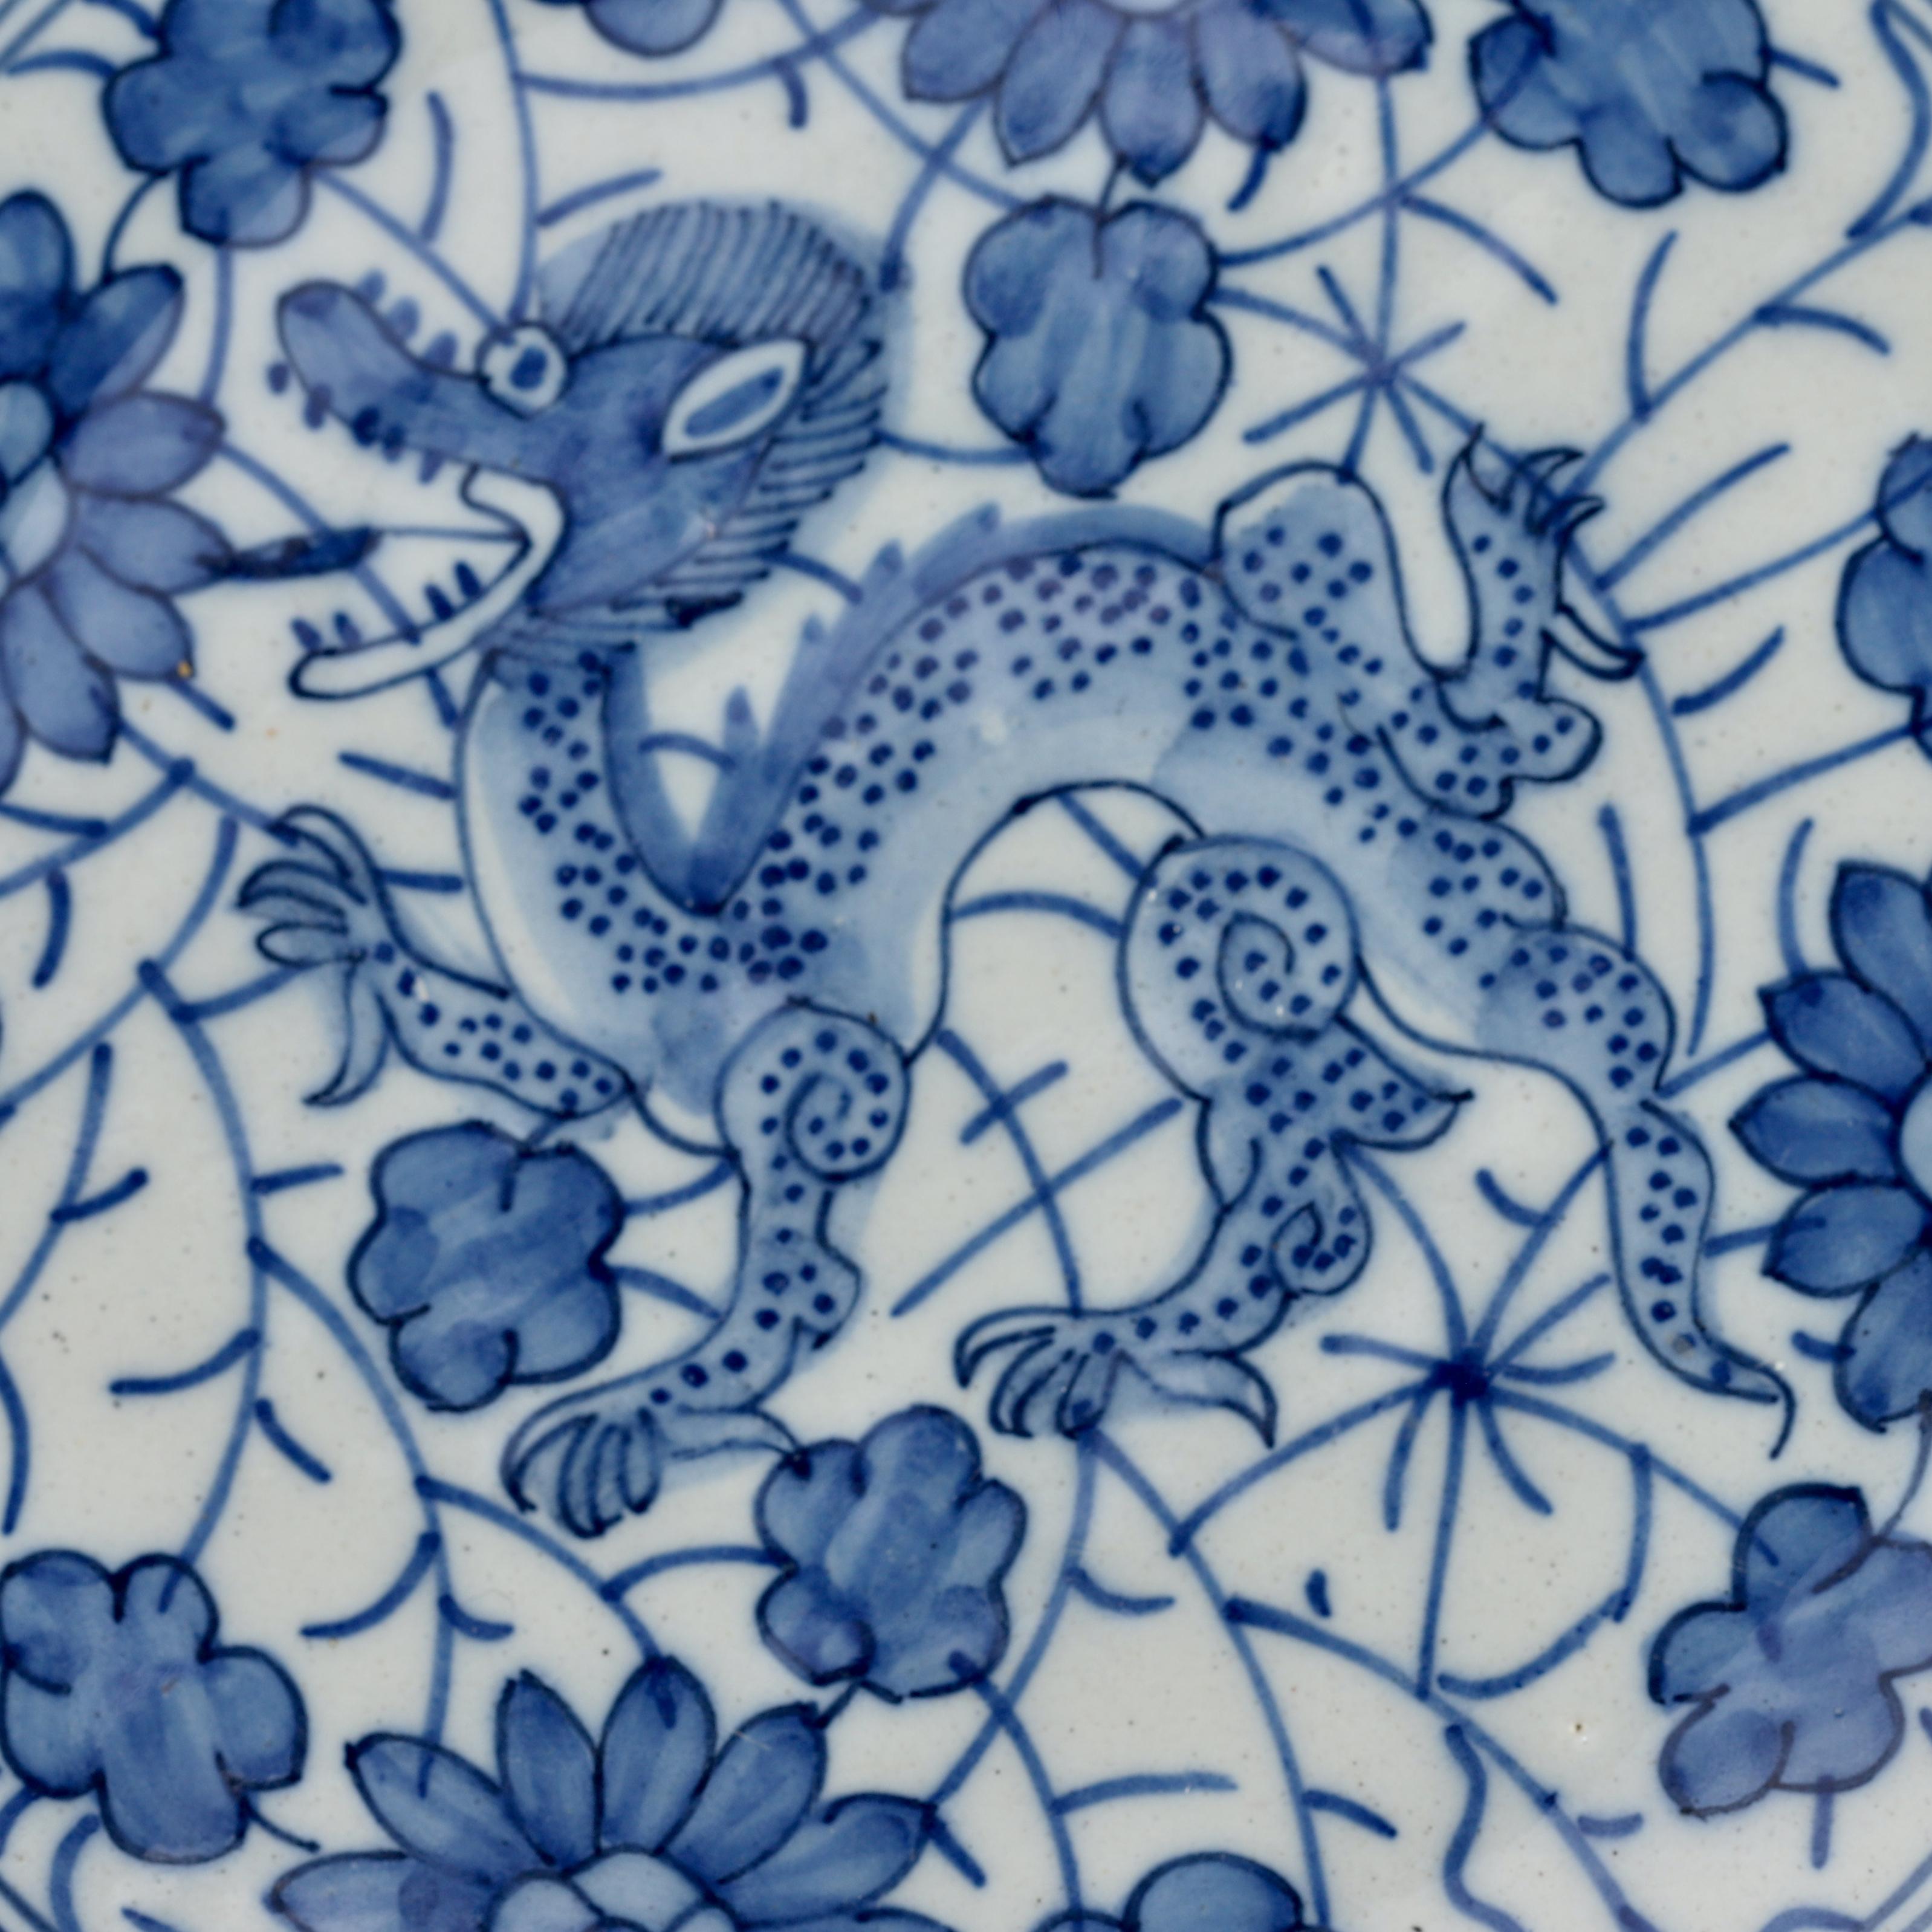 City: Delft
Workshop: De Grieksche A
Owner: Jacob van der Kool
Date: 1722 - 1757

Plate with decoration of a dragon on a ground of vines.
Wonderful fine decoration inspired on the Chinese Kangxi porcelain.
De rim is decorated with five